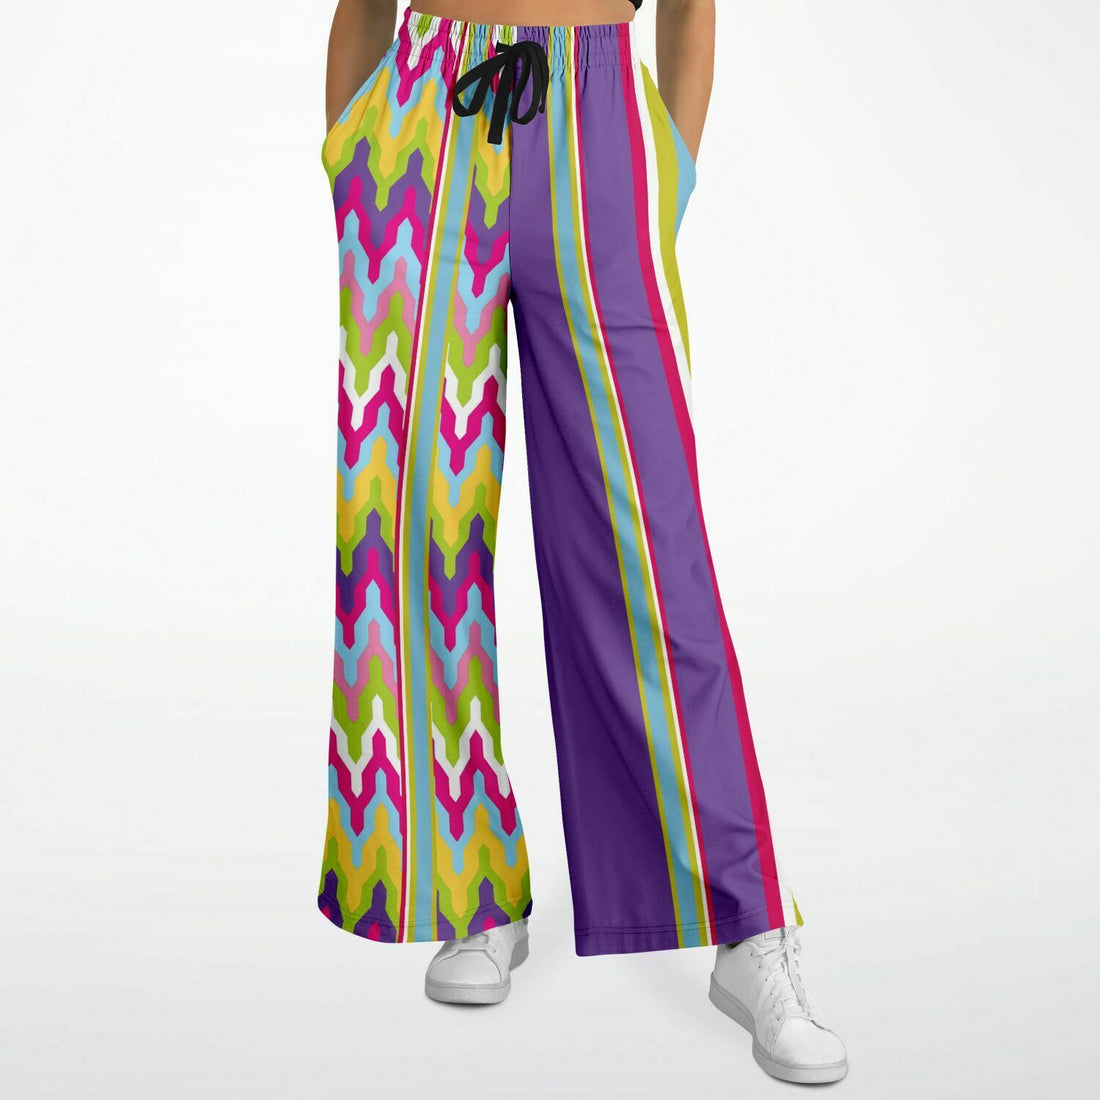 Groovy Purple Calypso Stretchy Phat Bellbottoms copy